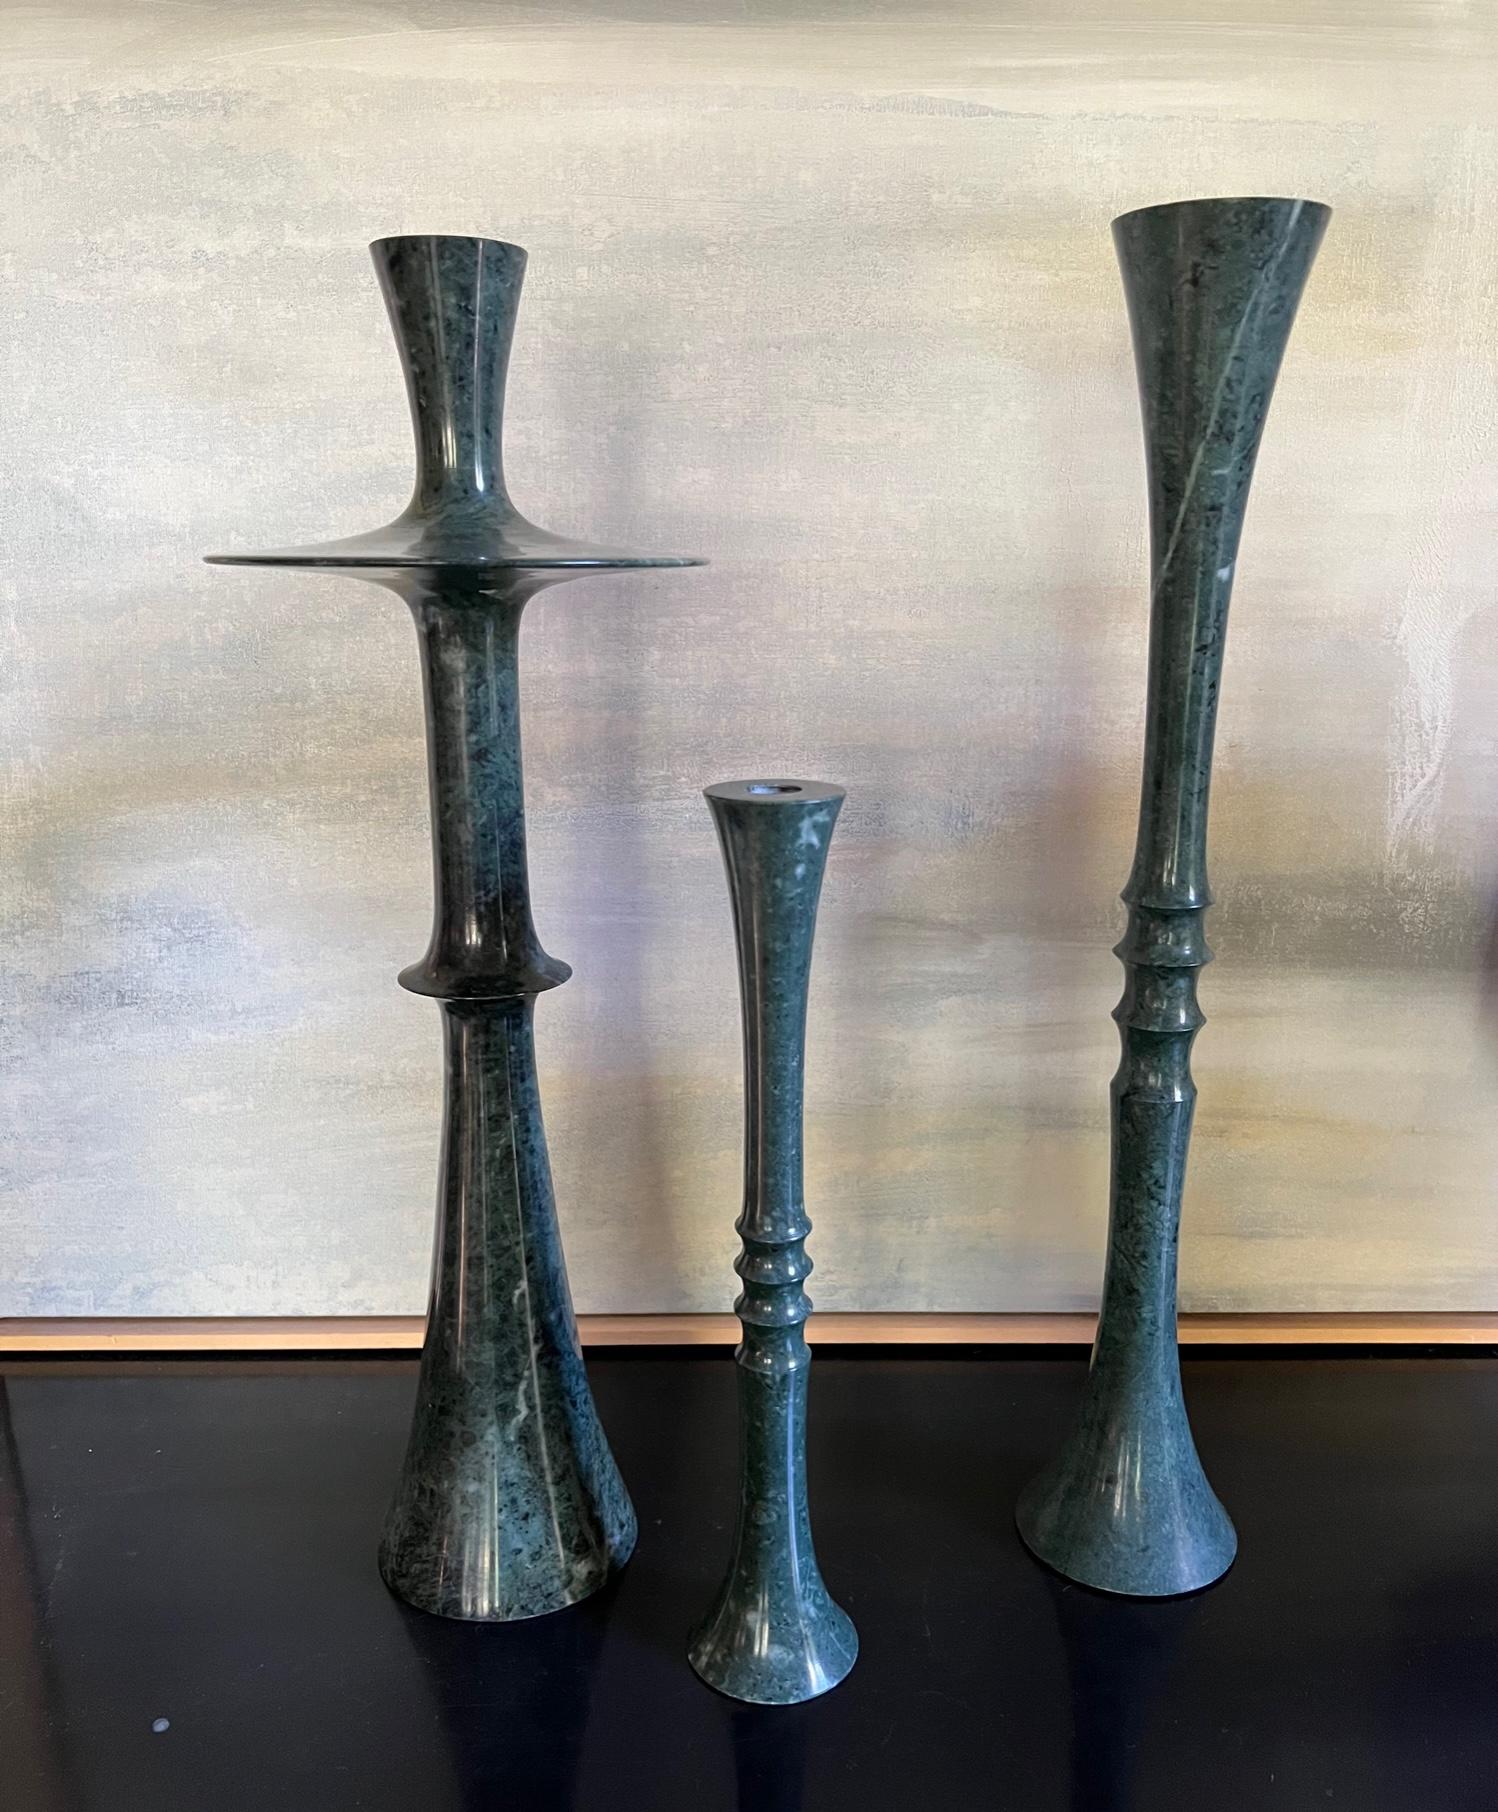 Contemporary Stephanie Odegard Green Marble Candle Holders Designed by Paul Mathieu- Set of 3